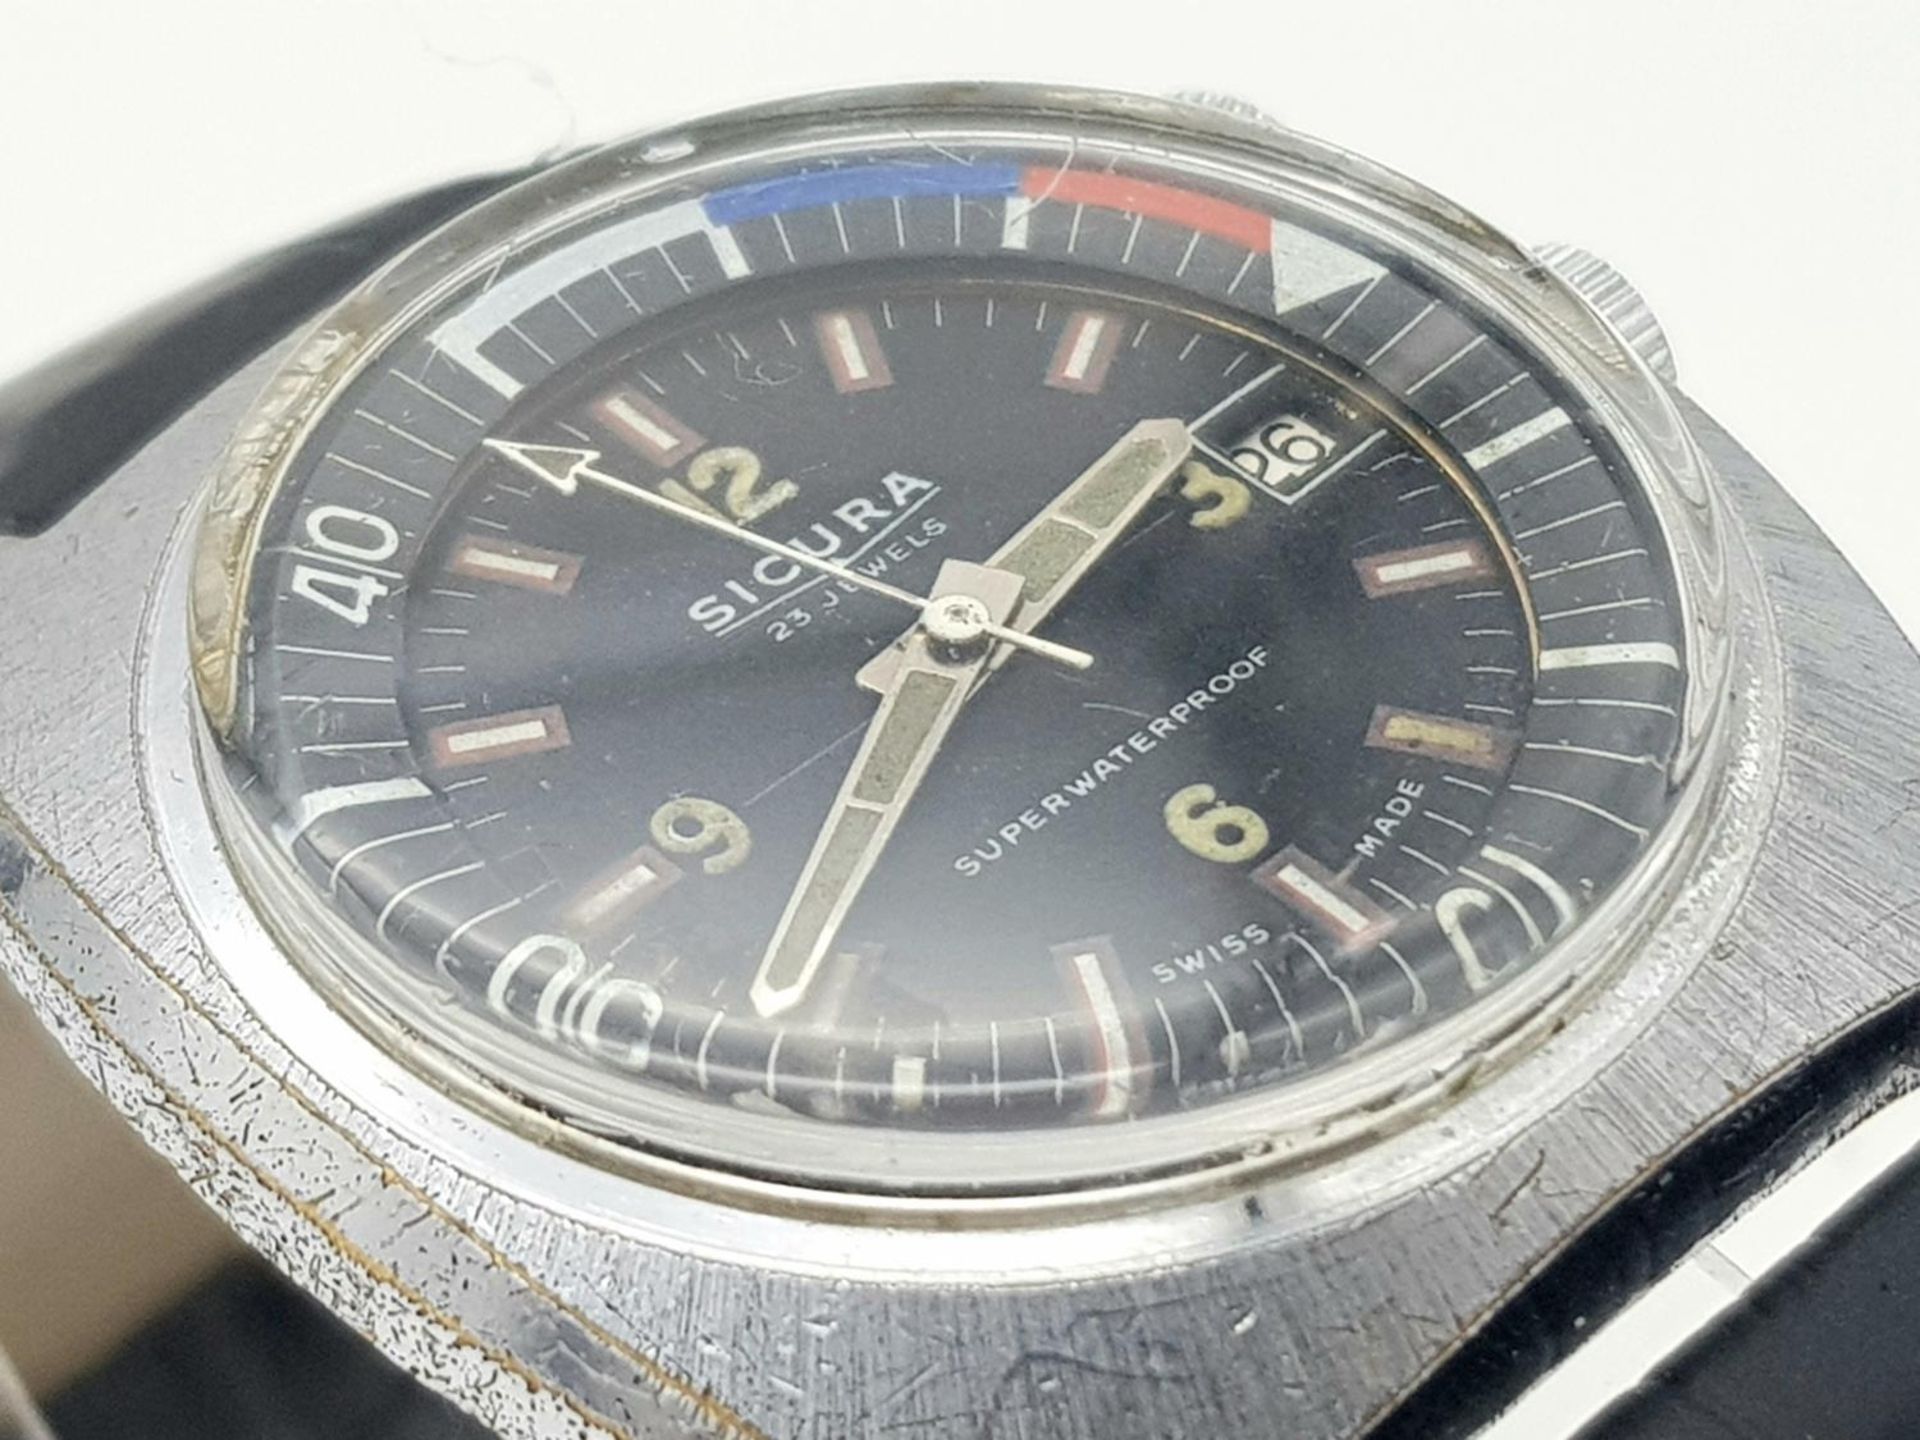 A Vintage Secura 23 Jewels Mechanical Gents Watch. Black leather strap. Stainless steel case - 38mm. - Image 3 of 5